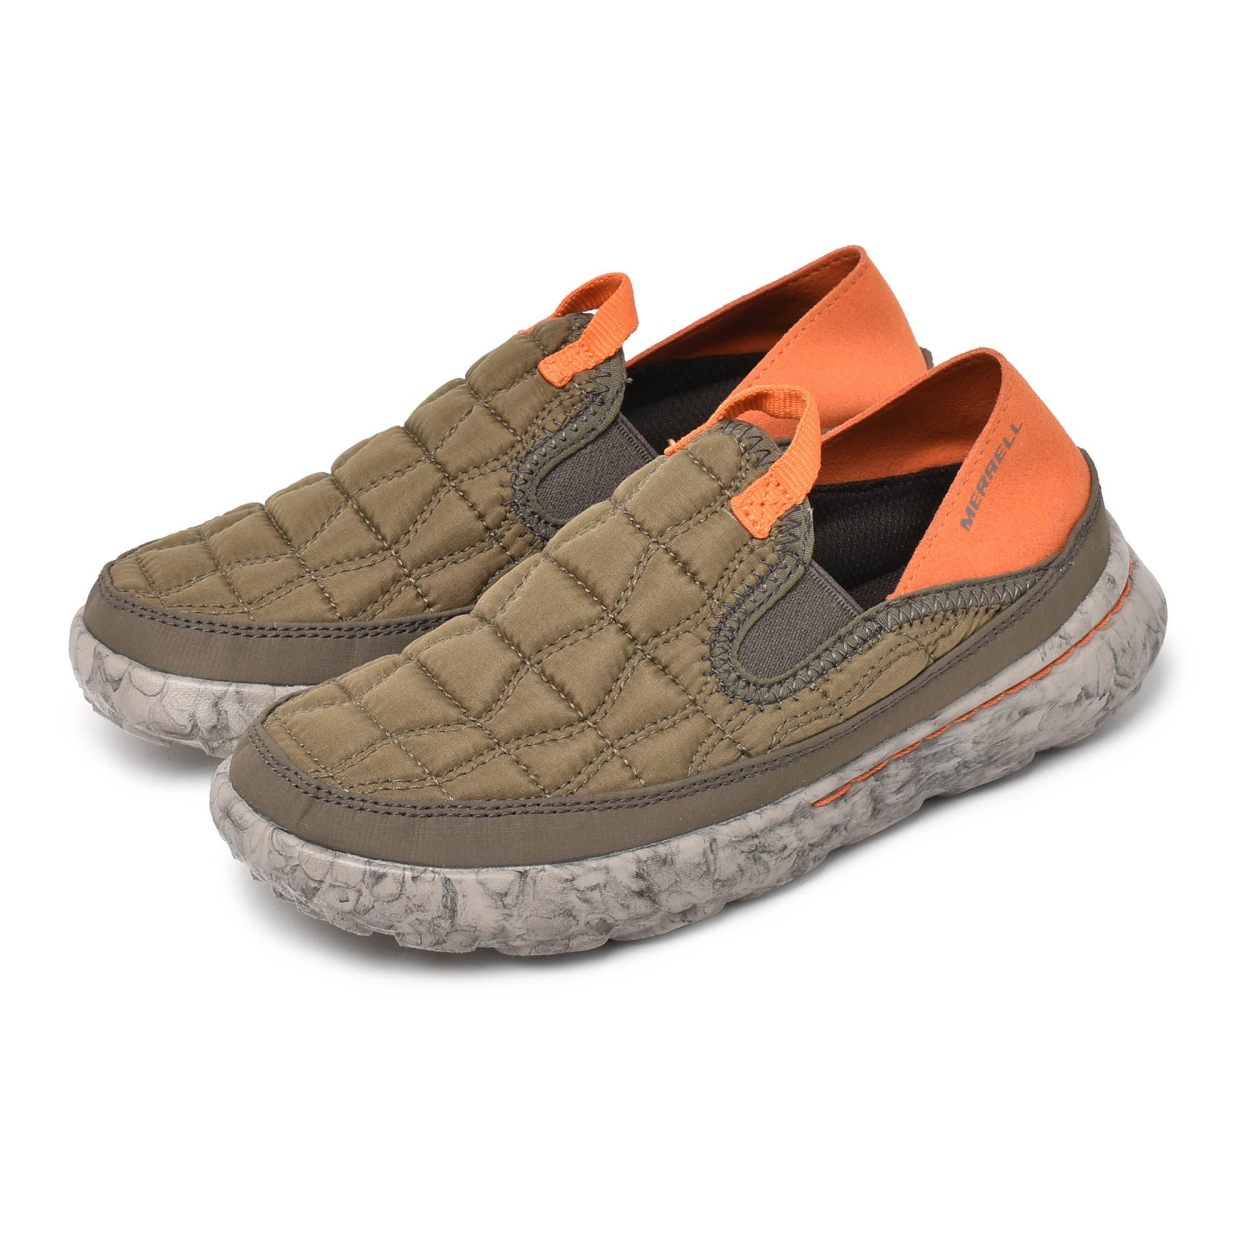 SALE 送料無料 メレル スニーカー キッズ ジュニア 子供 ハット モック 2.0 MERRELL 265924 265925 265926 165927 カーキ 黒｜z-craft｜03